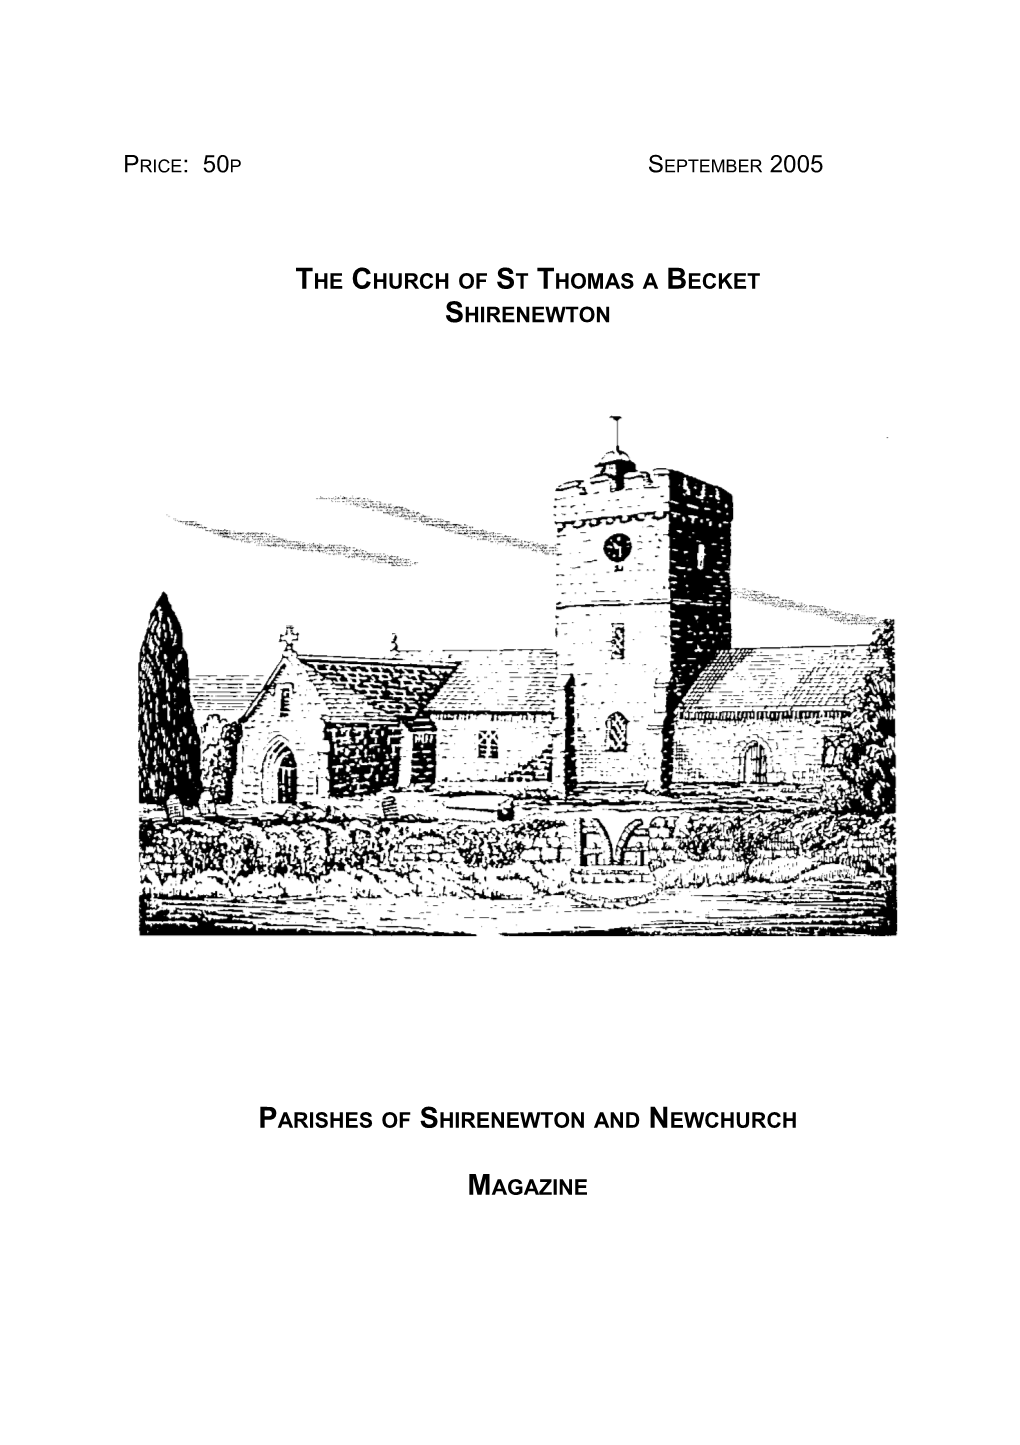 The Church of St Thomas a Becket